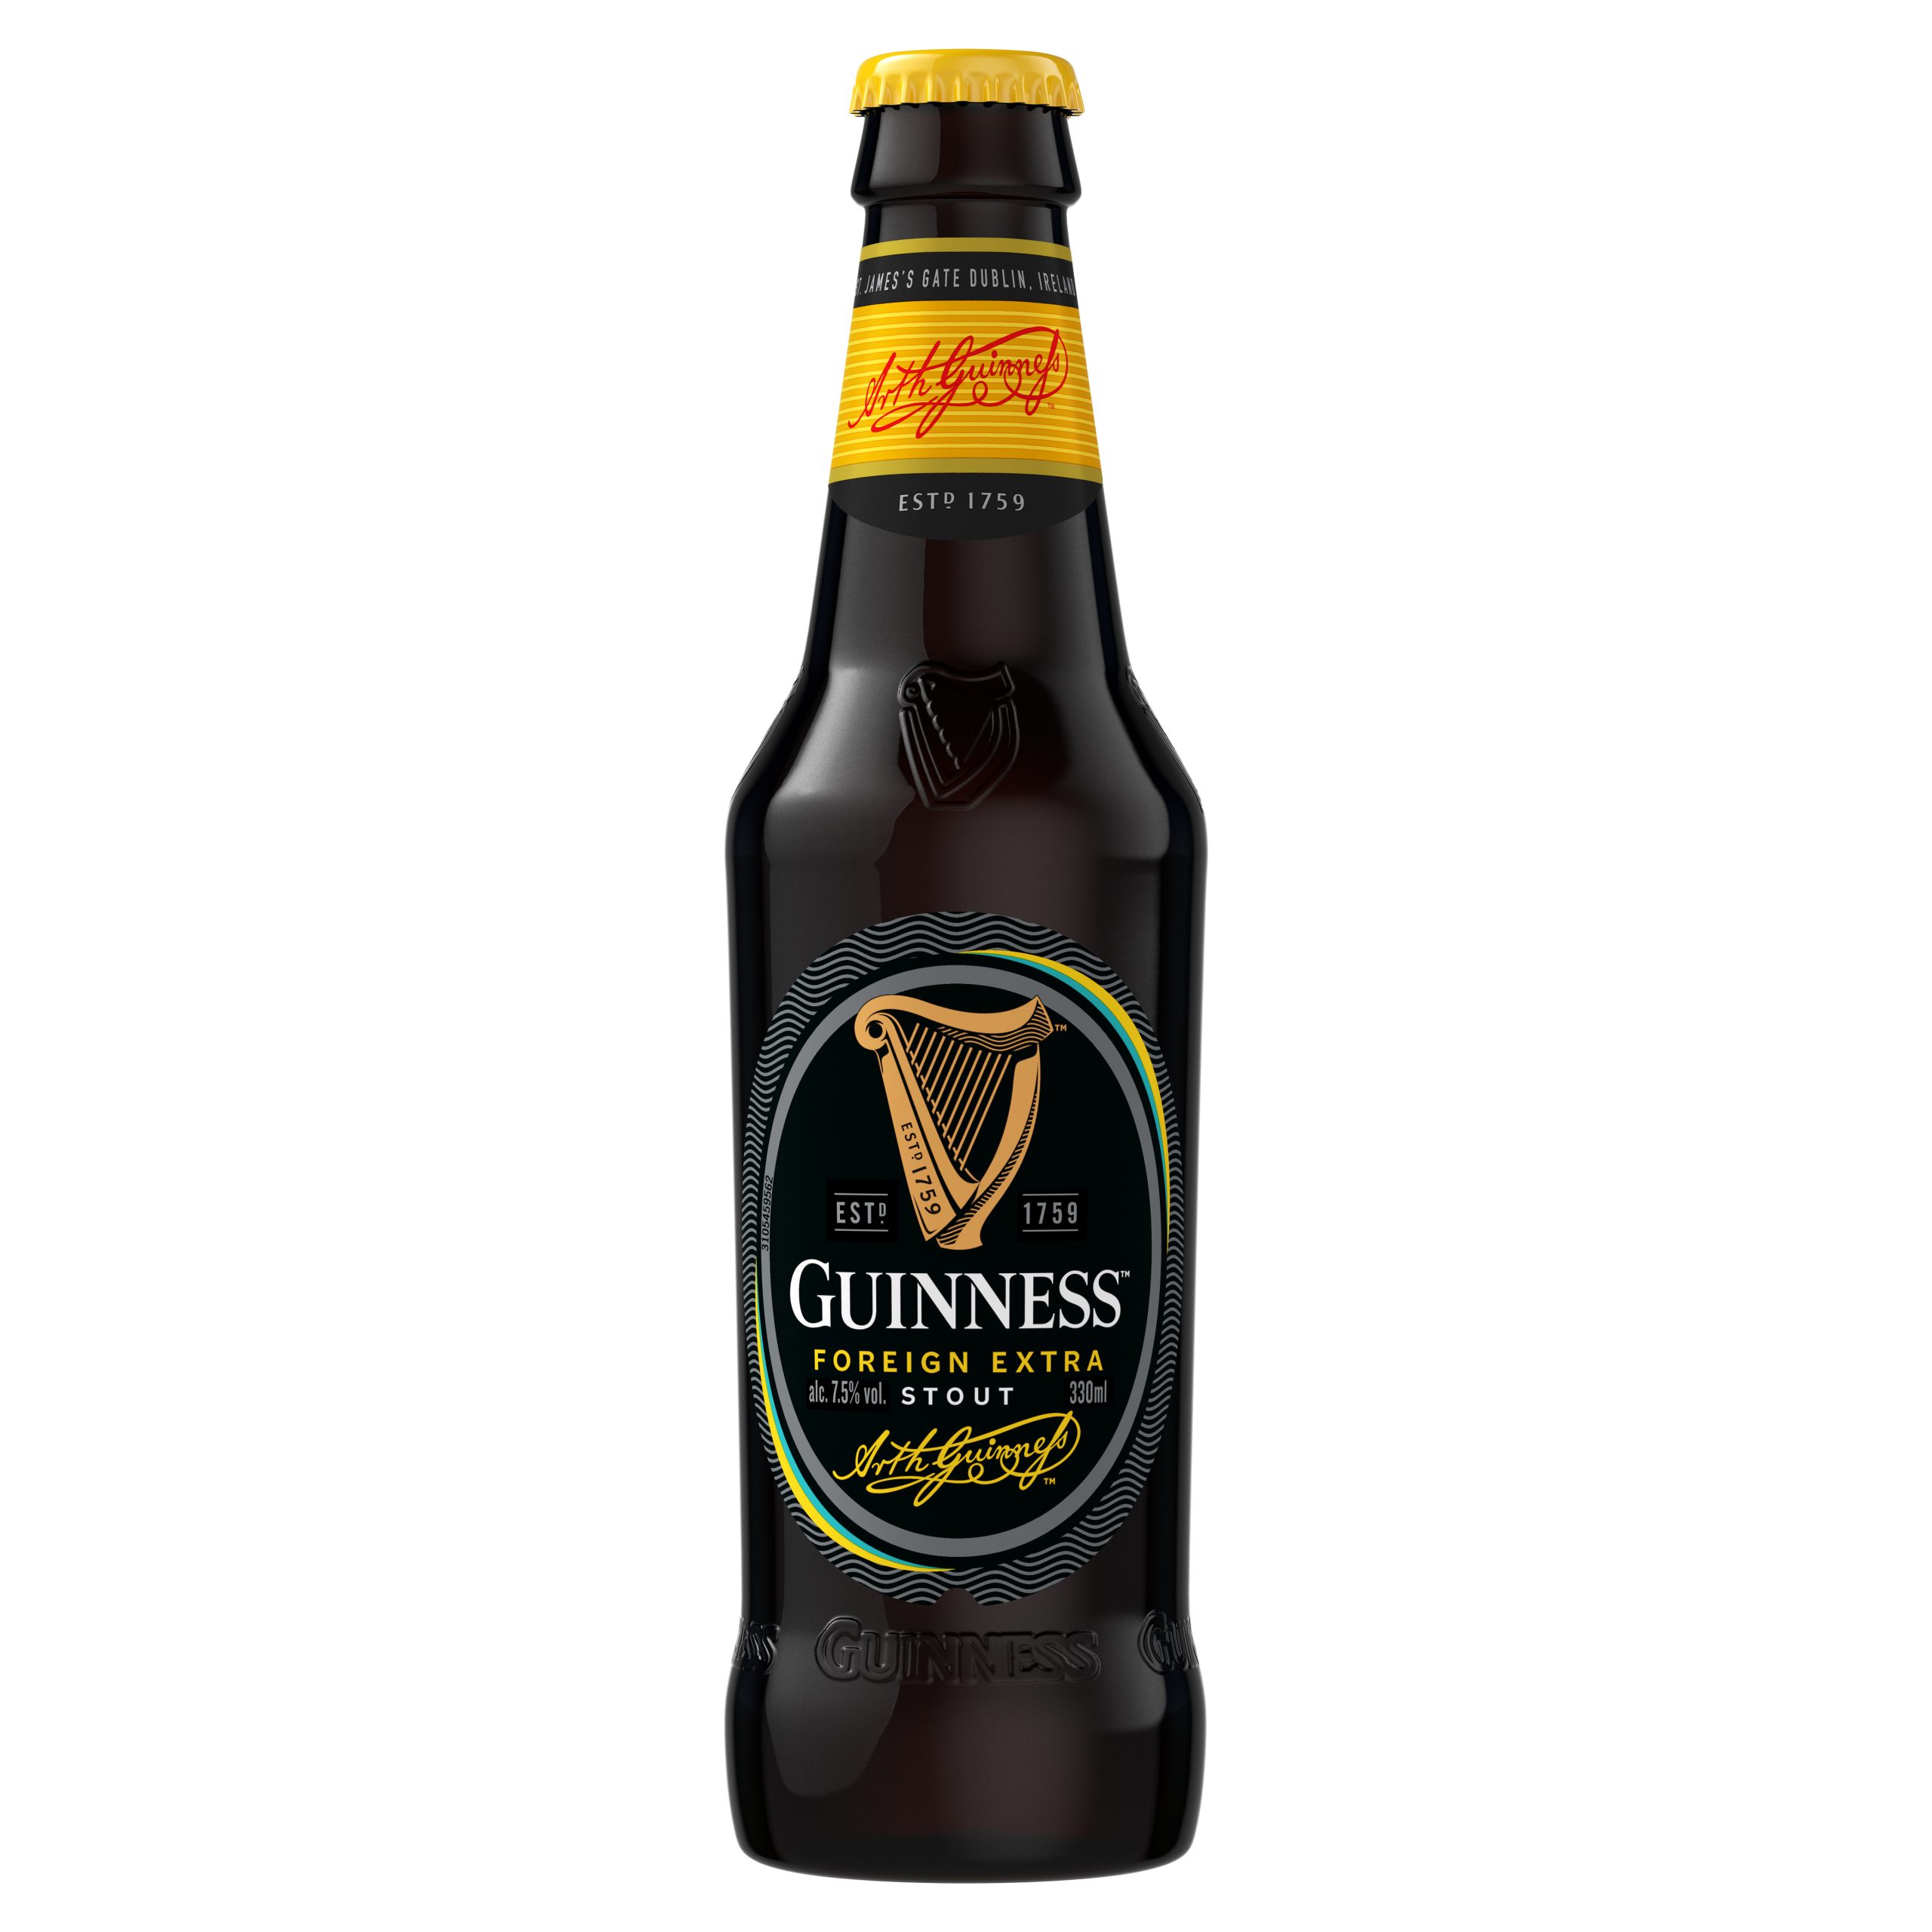 Guinness Foreign Extra Stout introduces new look in bottle and multipacks